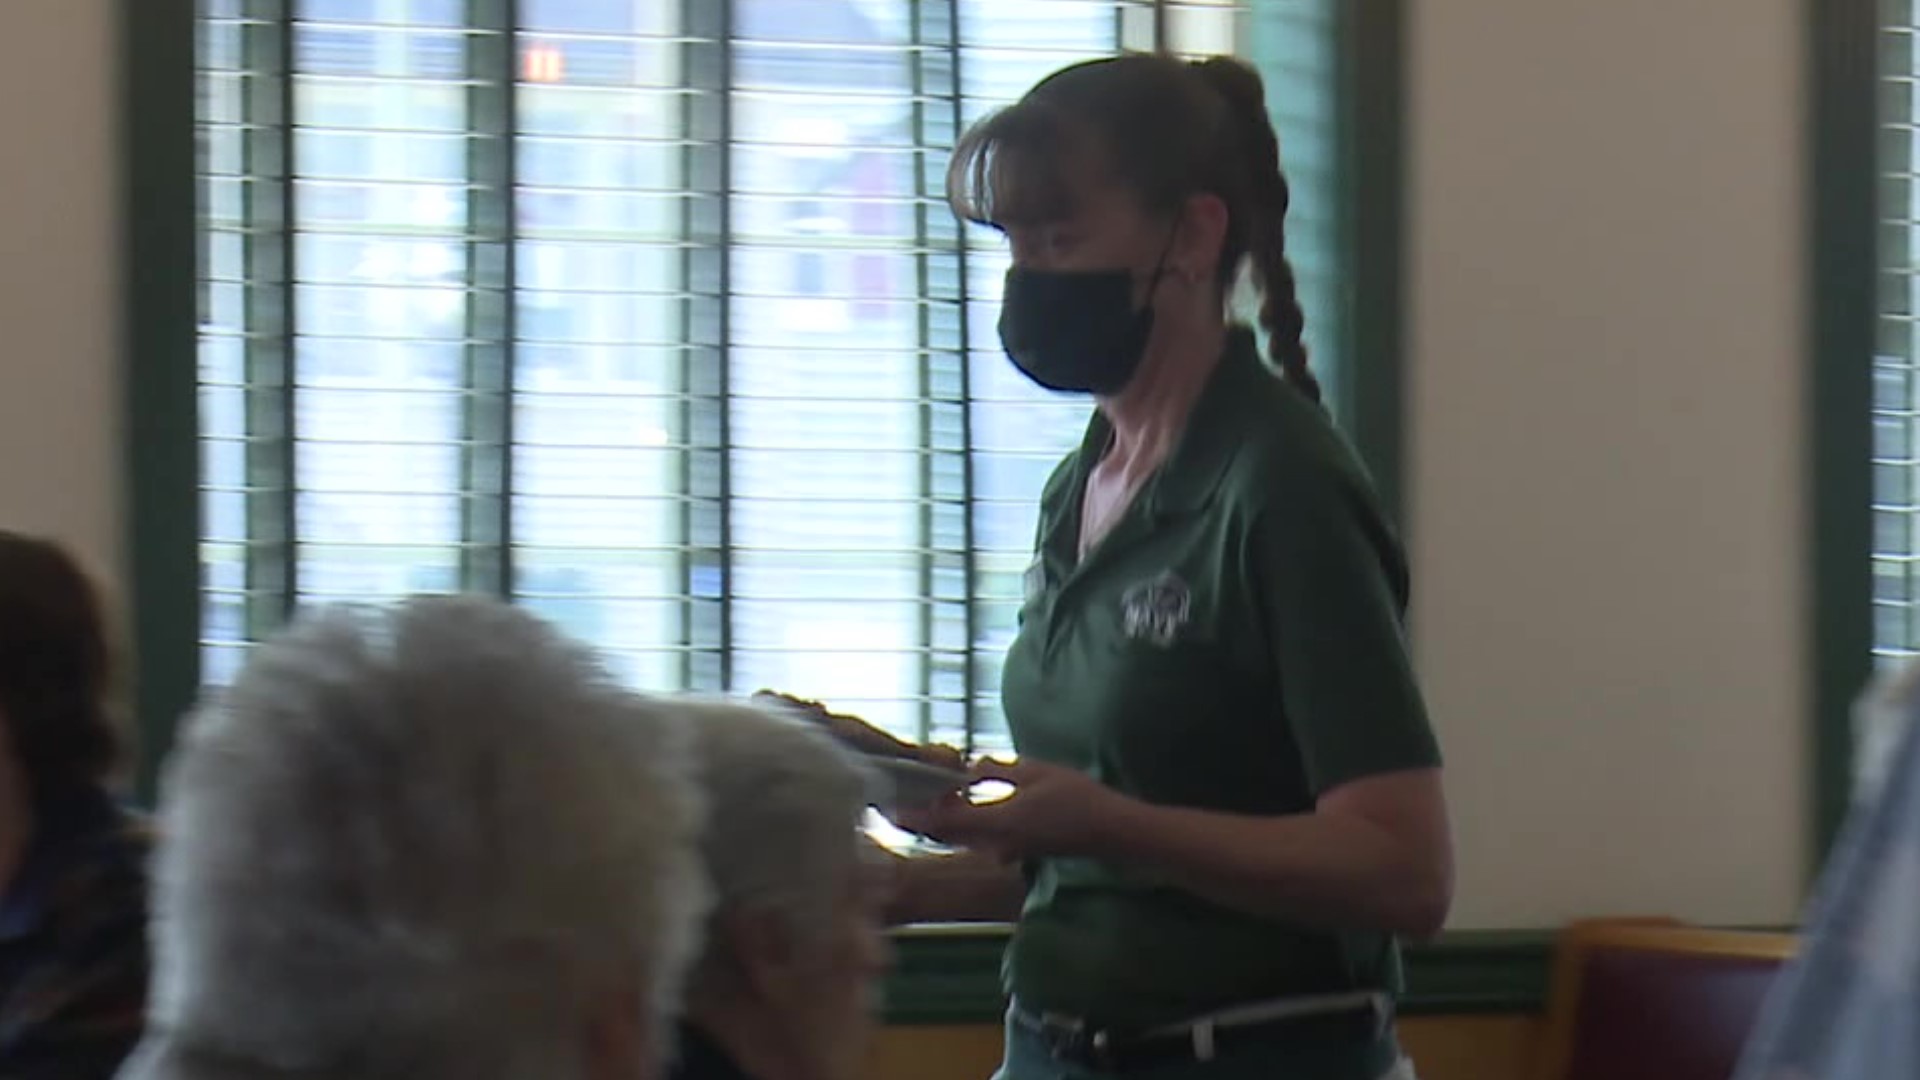 Newswatch 16's Elizabeth Worthington went to find out how the updated mask guidance will impact people in one of the industry's hit hardest by the pandemic.